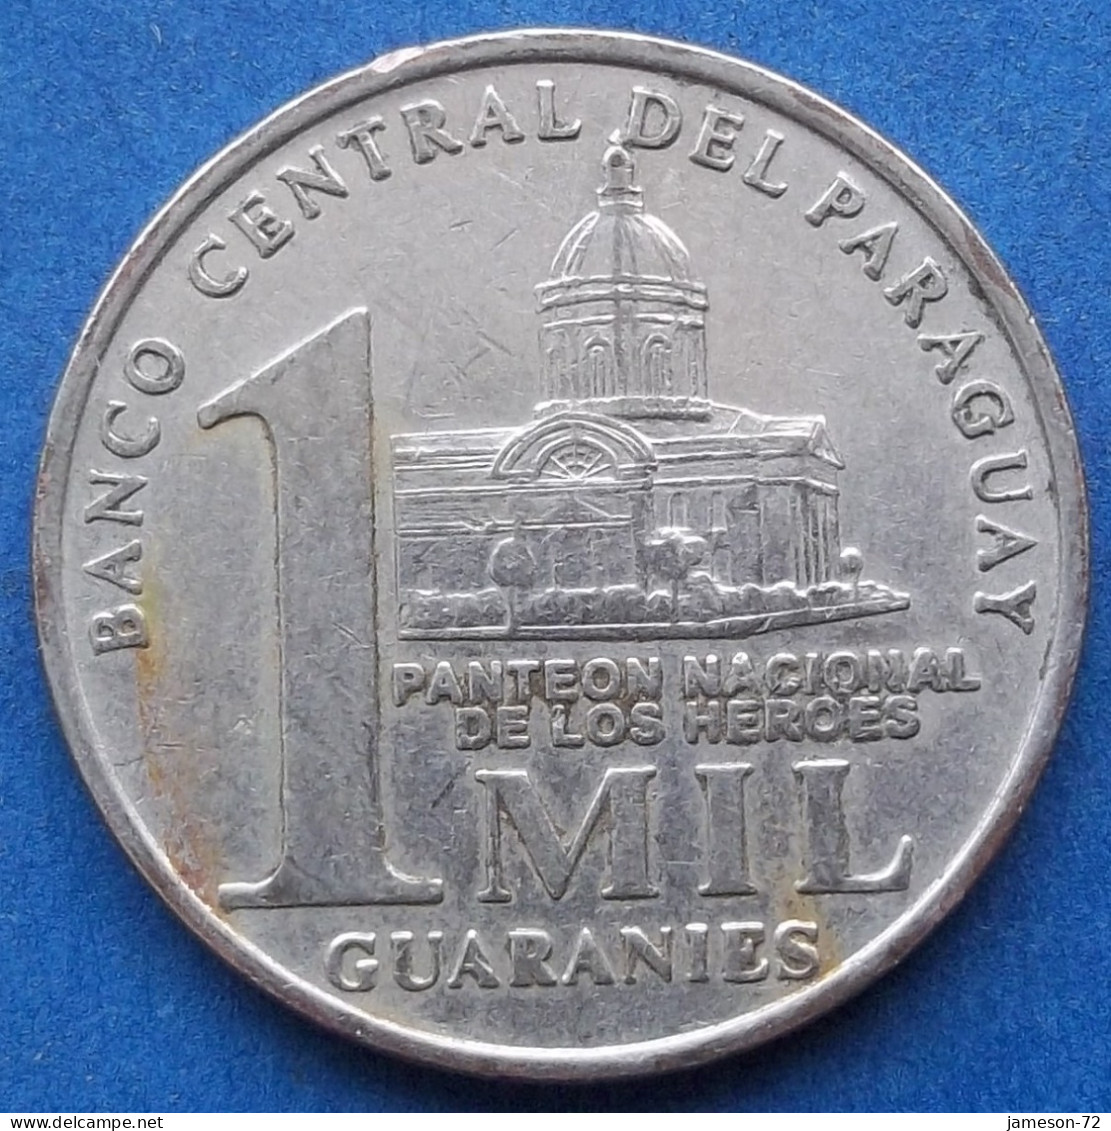 PARAGUAY - 1000 Guaranies 2006 "Marshal General Francisco Solano Lopez" KM# 198 Monetary Reform (1944) - Edelweiss Coins - Paraguay